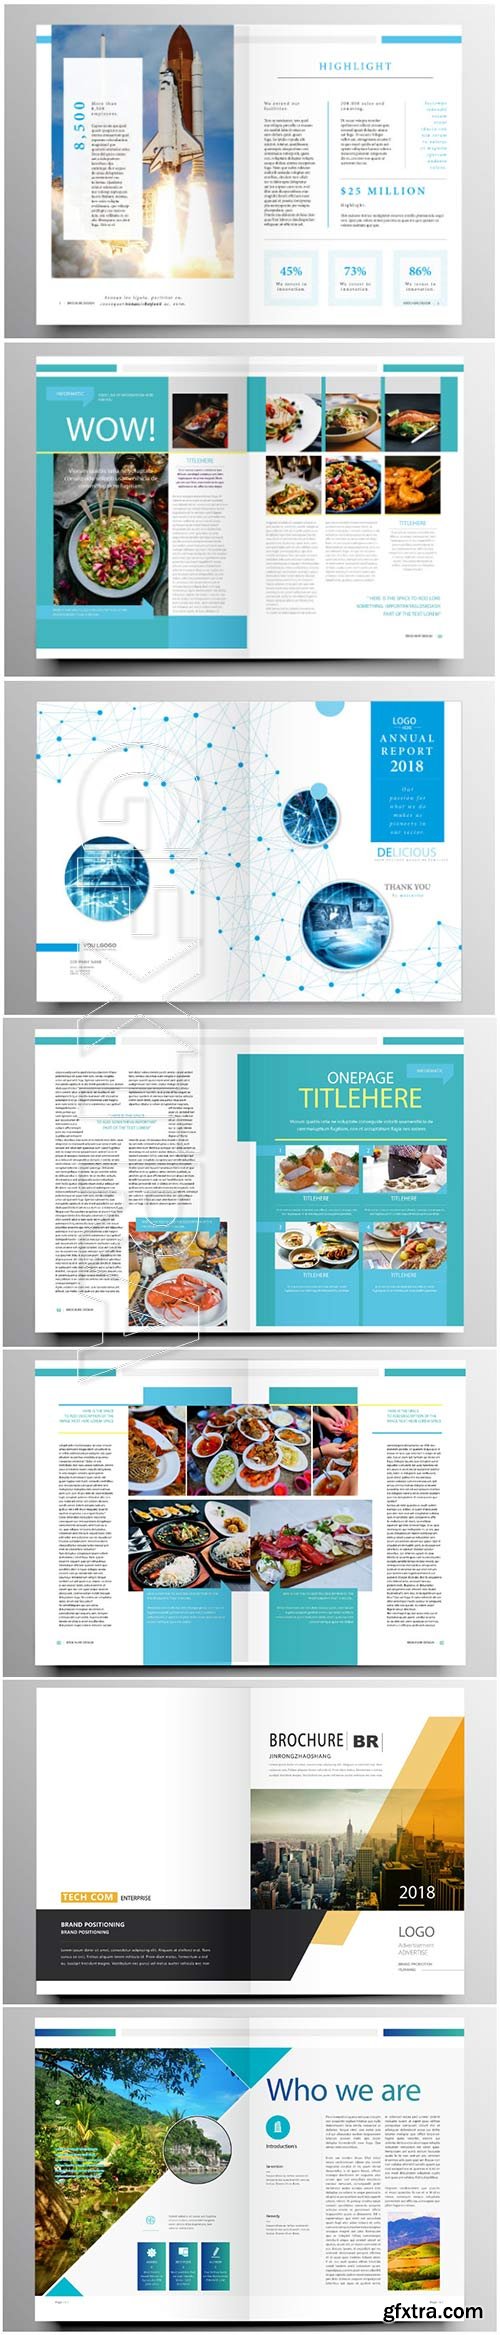 Brochure template vector layout design, corporate business annual report, magazine, flyer mockup # 201